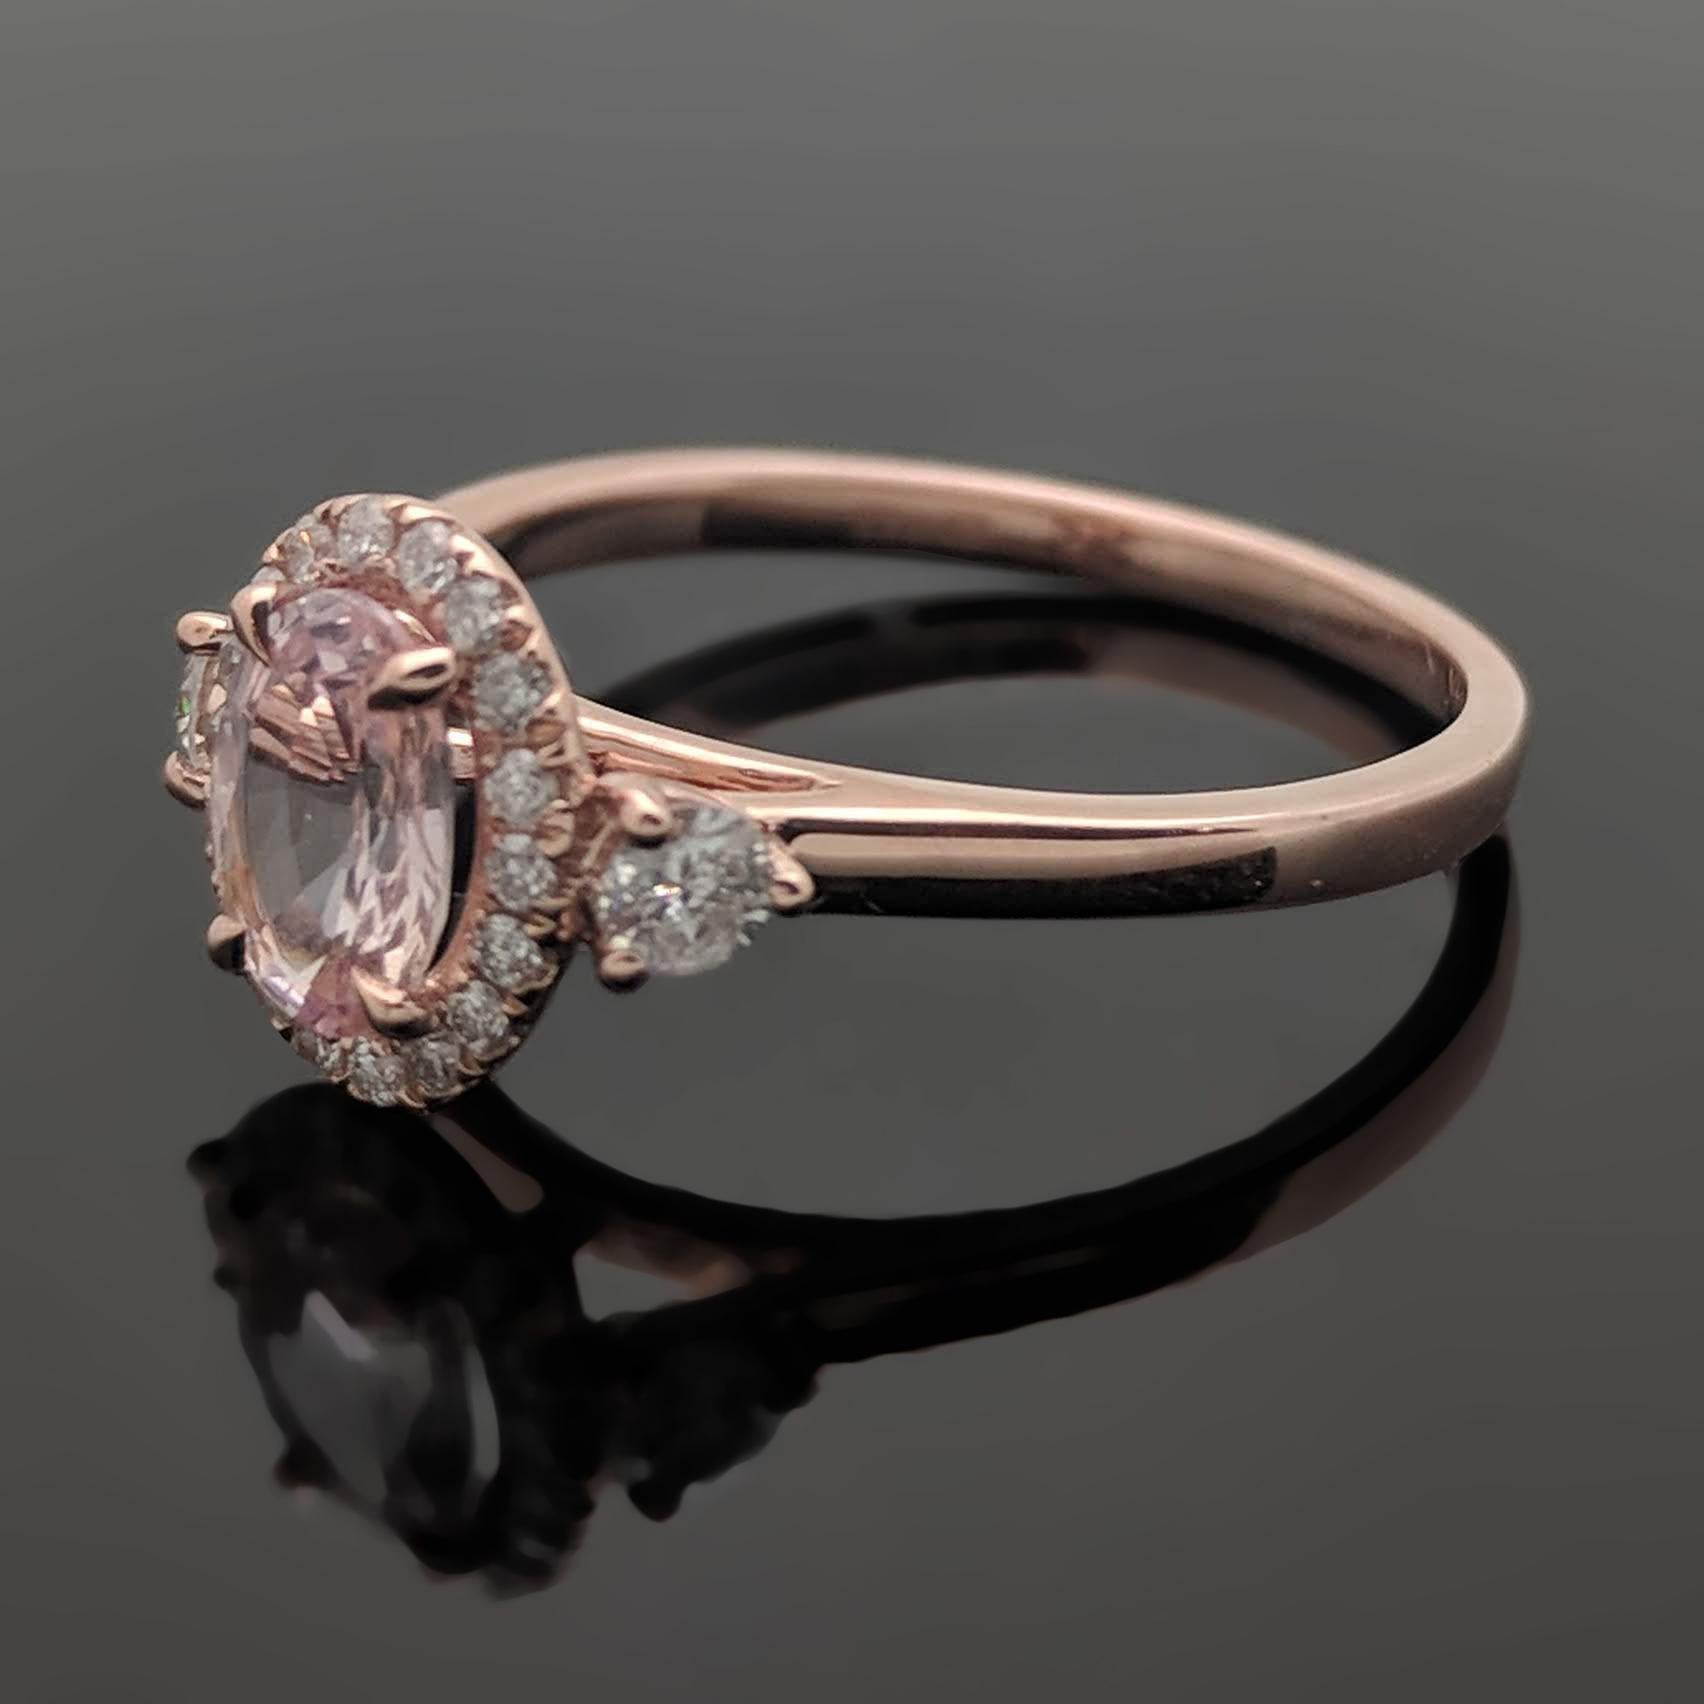 This 14kt rose gold ring is set with a pink sapphire estimated weight of 0.78ct and 4 claw prongs. The setting features a halo of diamonds as well as two side diamonds with an estimated 0.28cttw. Estimated weight of gold is 2 gr. 

We will size it